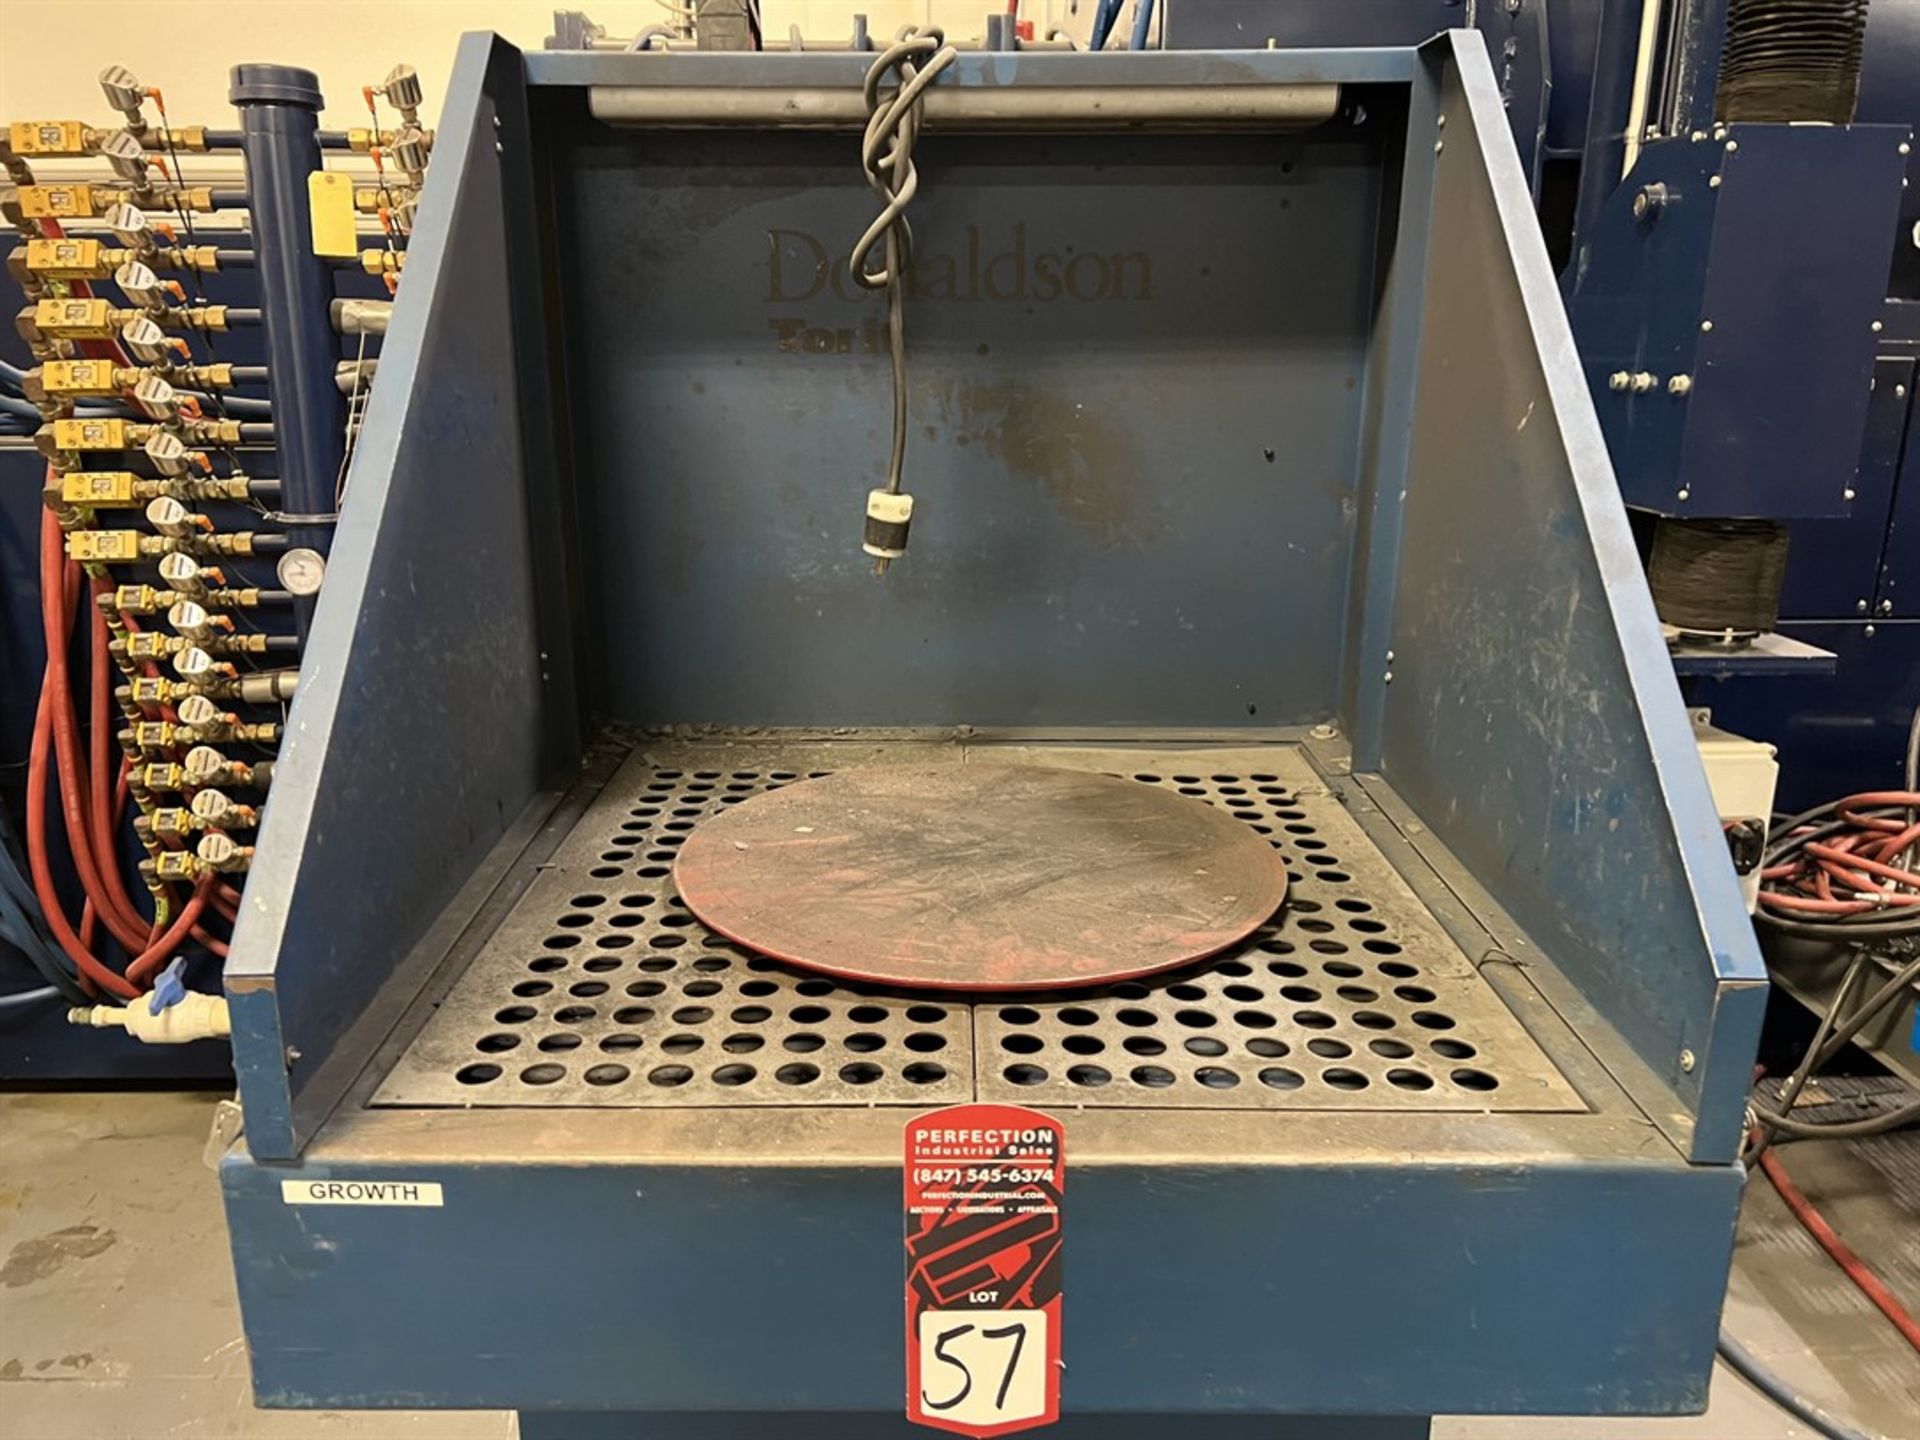 DONALDSON Torit DB-800 Downdraft Table, s/n 2554135, 1.5 HP, 27" x 26" Working Area - Image 3 of 4